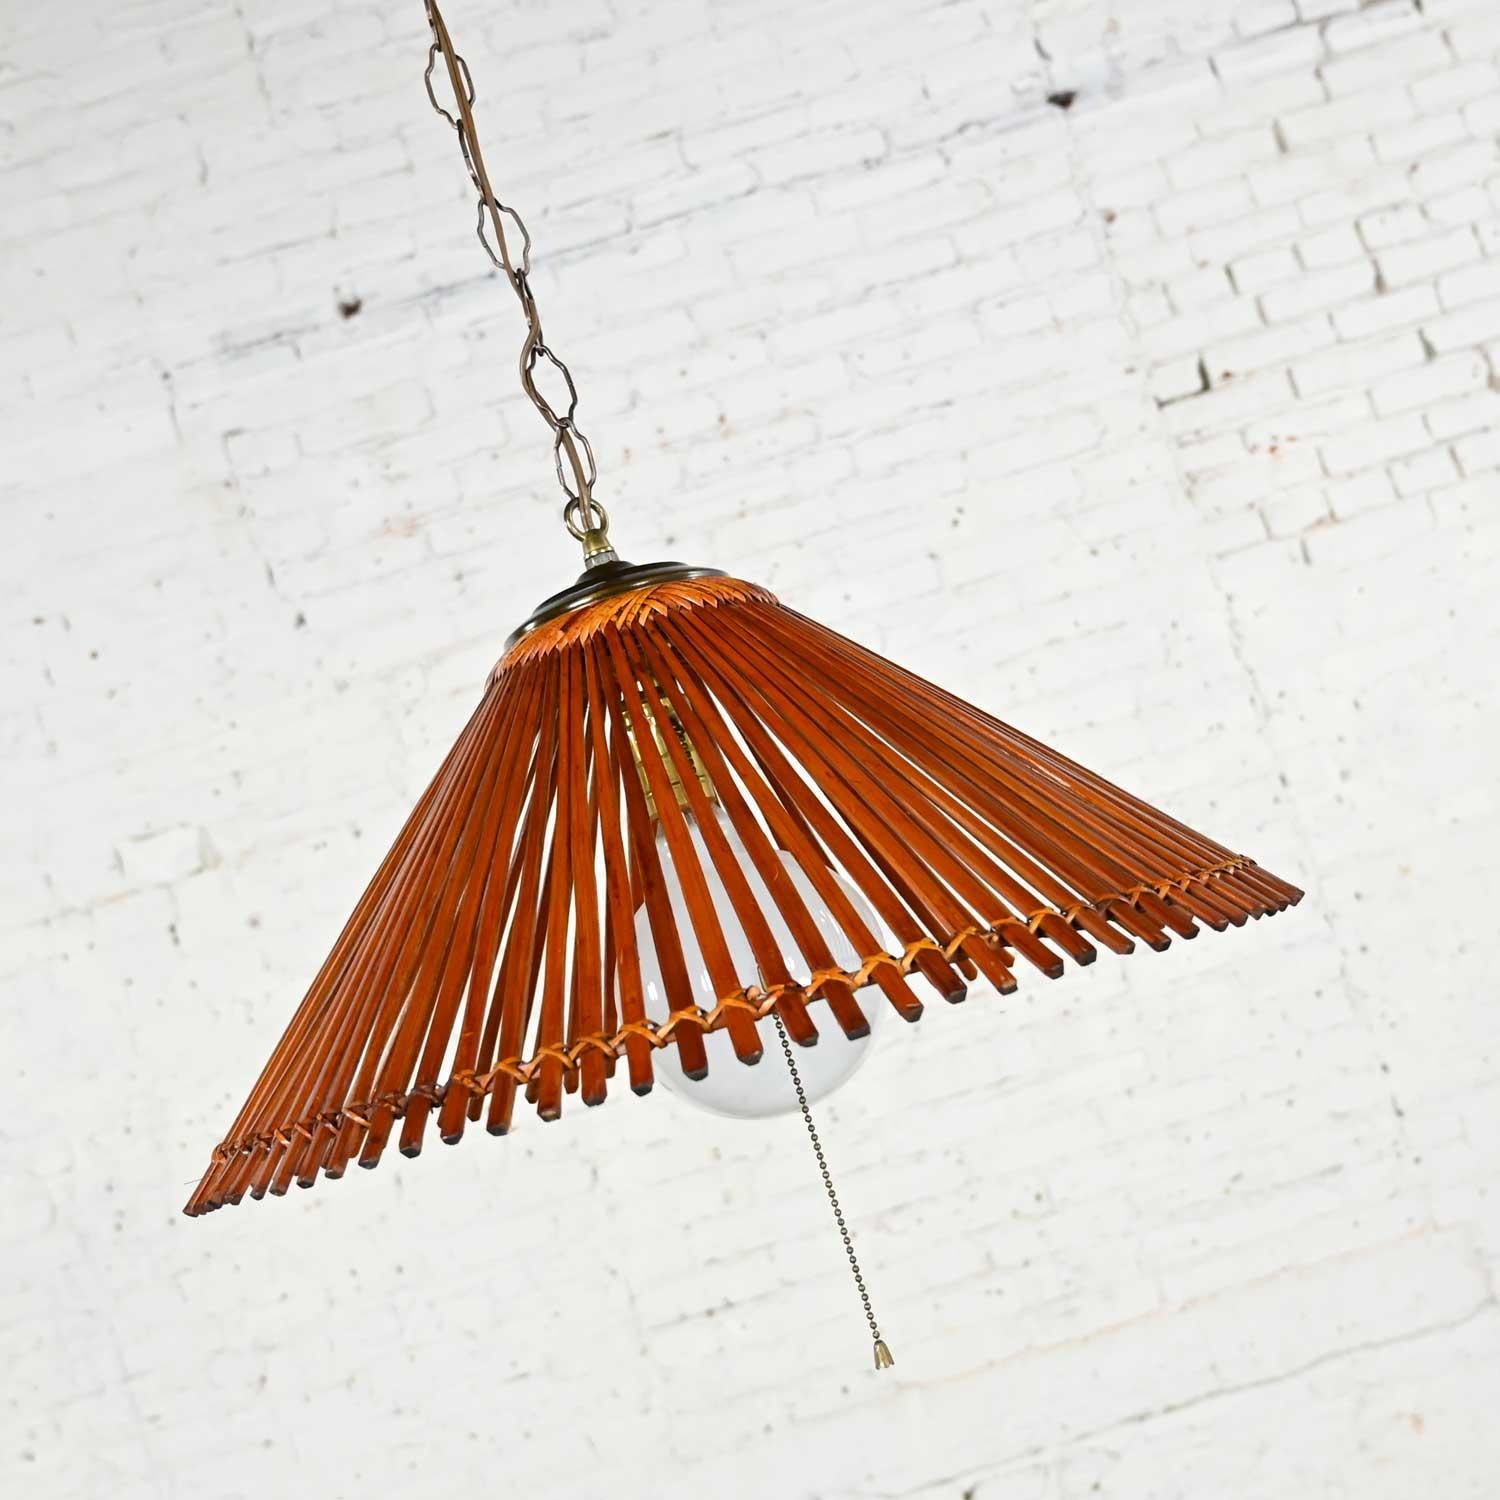 Handsome vintage Mid-Century Modern split rattan hanging conical light with large round bulb (which we will include), antiqued brass cap or finial and chain. Beautiful condition, keeping in mind that this is vintage and not new so will have signs of